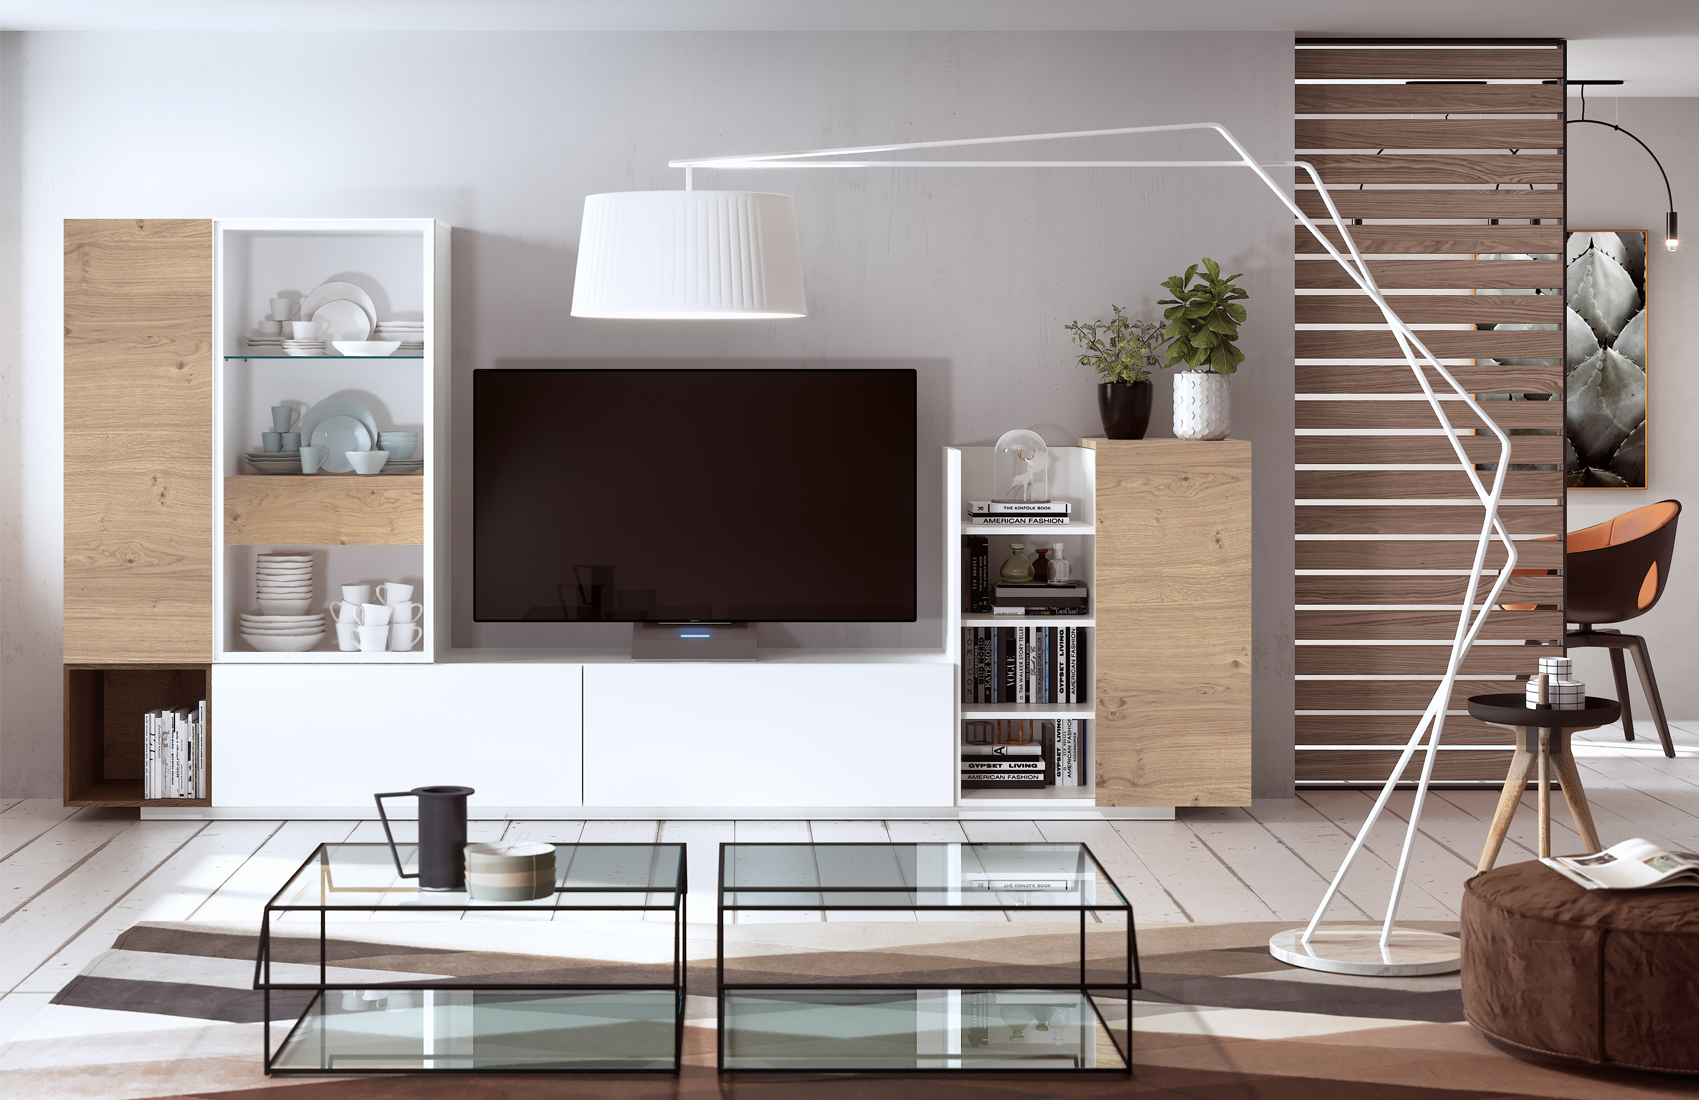 Brands MSC Modern Wall Unit, Italy Composition CK02